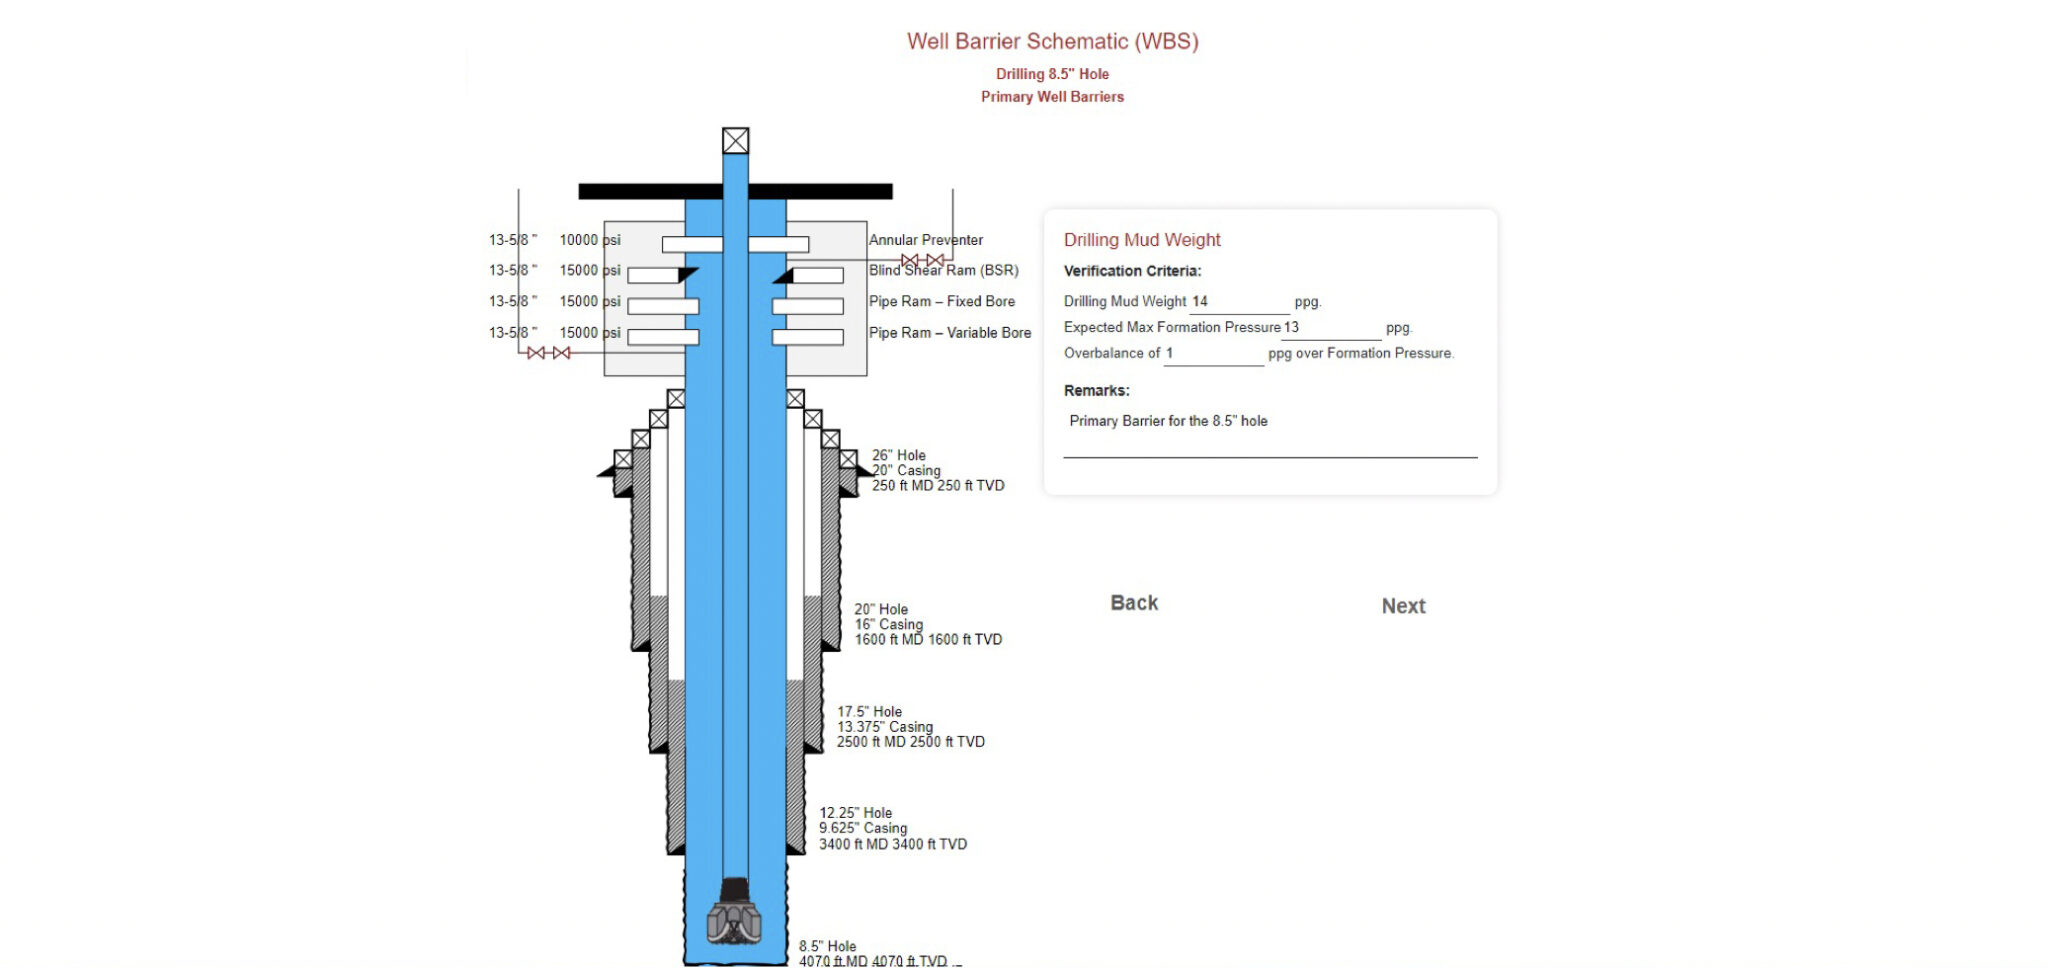 Primary Well Barriers (Image shown for Drilling)